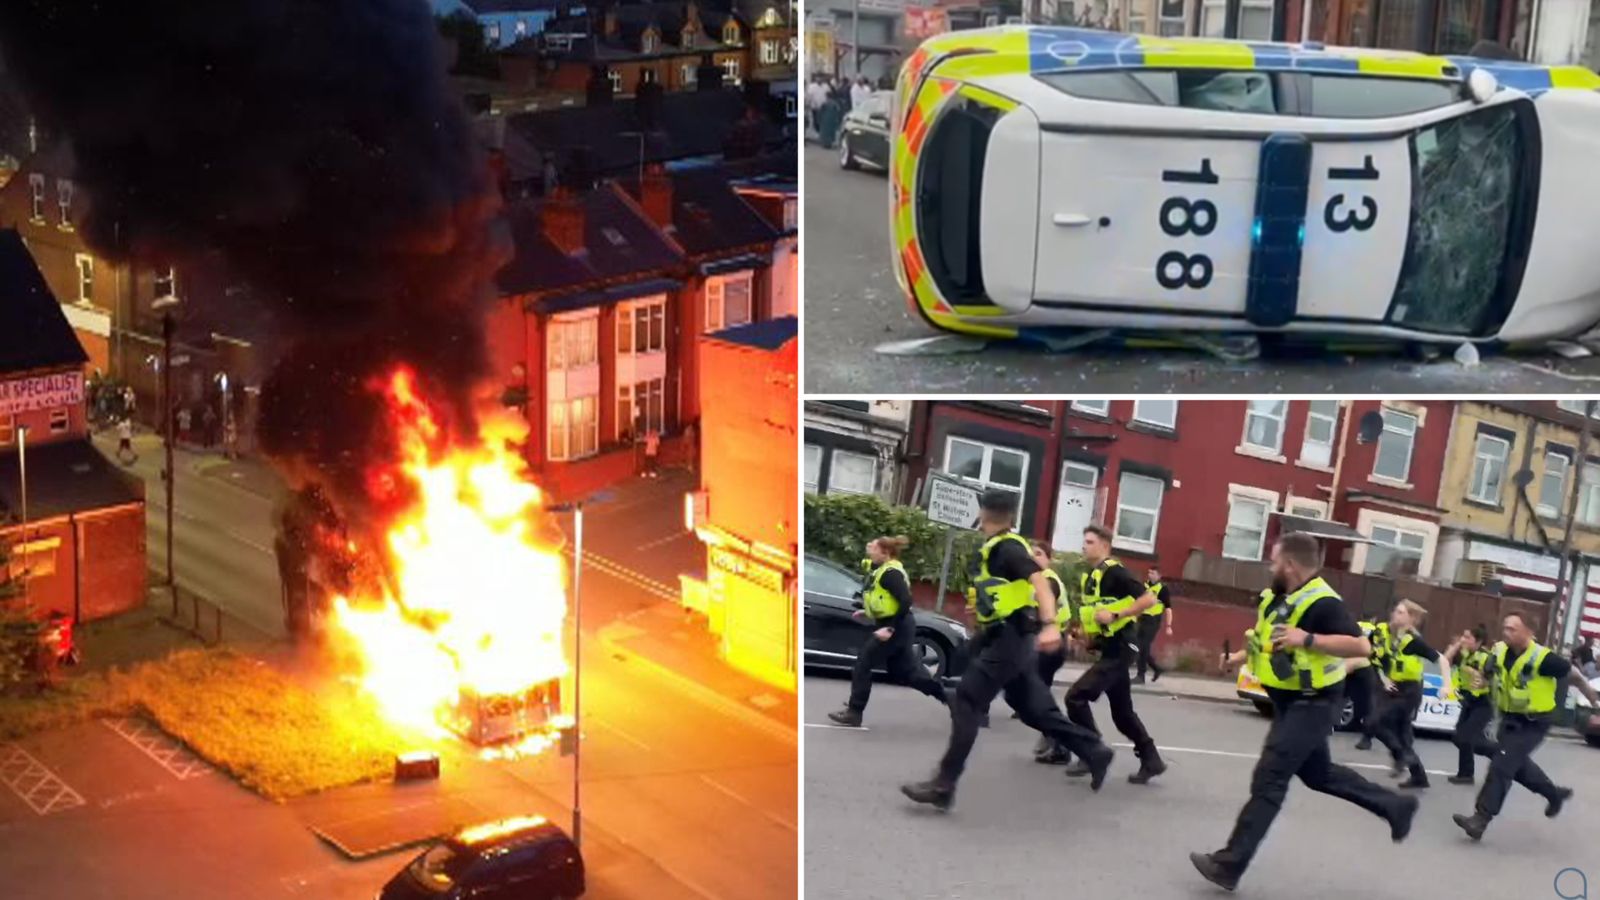 'Very visible police presence' on streets of Leeds after mass riot erupts with vehicles overturned and set on fire